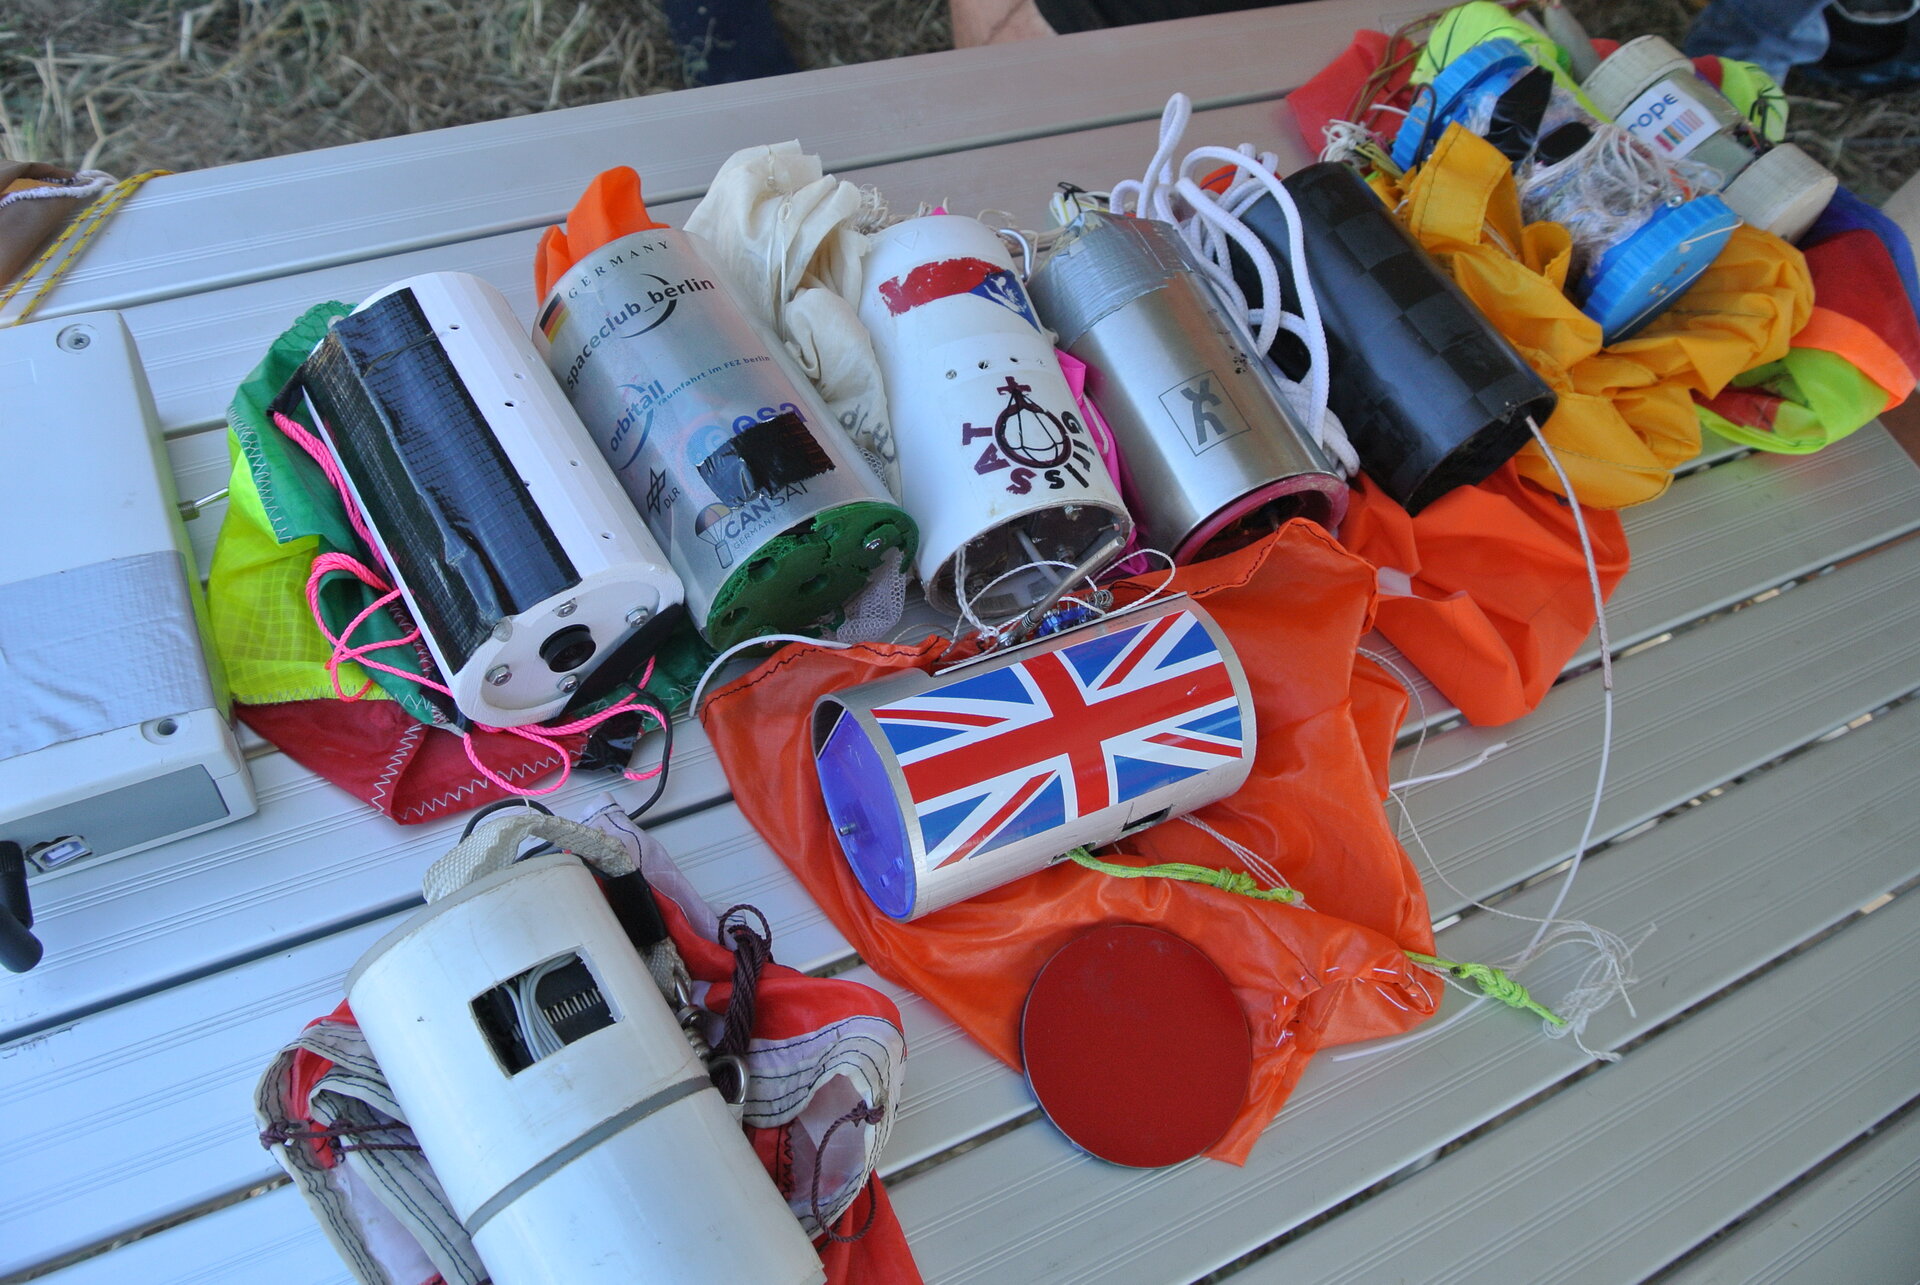 CanSats recovered during the 2015 European Competition 